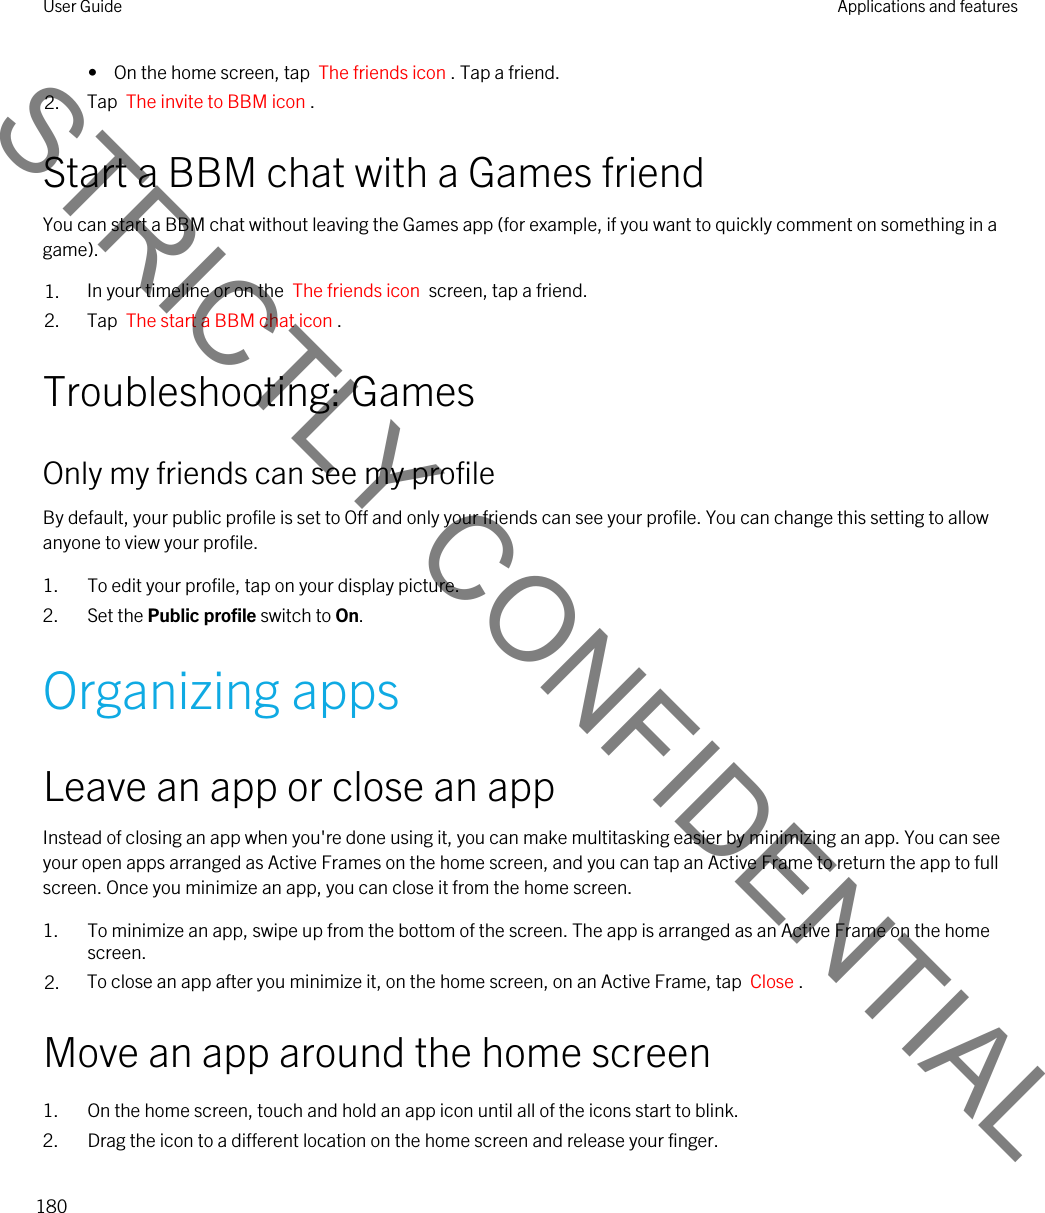 •  On the home screen, tap  The friends icon . Tap a friend.2. Tap  The invite to BBM icon .Start a BBM chat with a Games friendYou can start a BBM chat without leaving the Games app (for example, if you want to quickly comment on something in a game).1. In your timeline or on the  The friends icon  screen, tap a friend.2. Tap  The start a BBM chat icon .Troubleshooting: GamesOnly my friends can see my profileBy default, your public profile is set to Off and only your friends can see your profile. You can change this setting to allow anyone to view your profile.1. To edit your profile, tap on your display picture.2. Set the Public profile switch to On.Organizing appsLeave an app or close an appInstead of closing an app when you&apos;re done using it, you can make multitasking easier by minimizing an app. You can see your open apps arranged as Active Frames on the home screen, and you can tap an Active Frame to return the app to full screen. Once you minimize an app, you can close it from the home screen.1. To minimize an app, swipe up from the bottom of the screen. The app is arranged as an Active Frame on the home screen.2. To close an app after you minimize it, on the home screen, on an Active Frame, tap  Close .Move an app around the home screen1. On the home screen, touch and hold an app icon until all of the icons start to blink.2. Drag the icon to a different location on the home screen and release your finger.User Guide Applications and features180STRICTLY CONFIDENTIAL